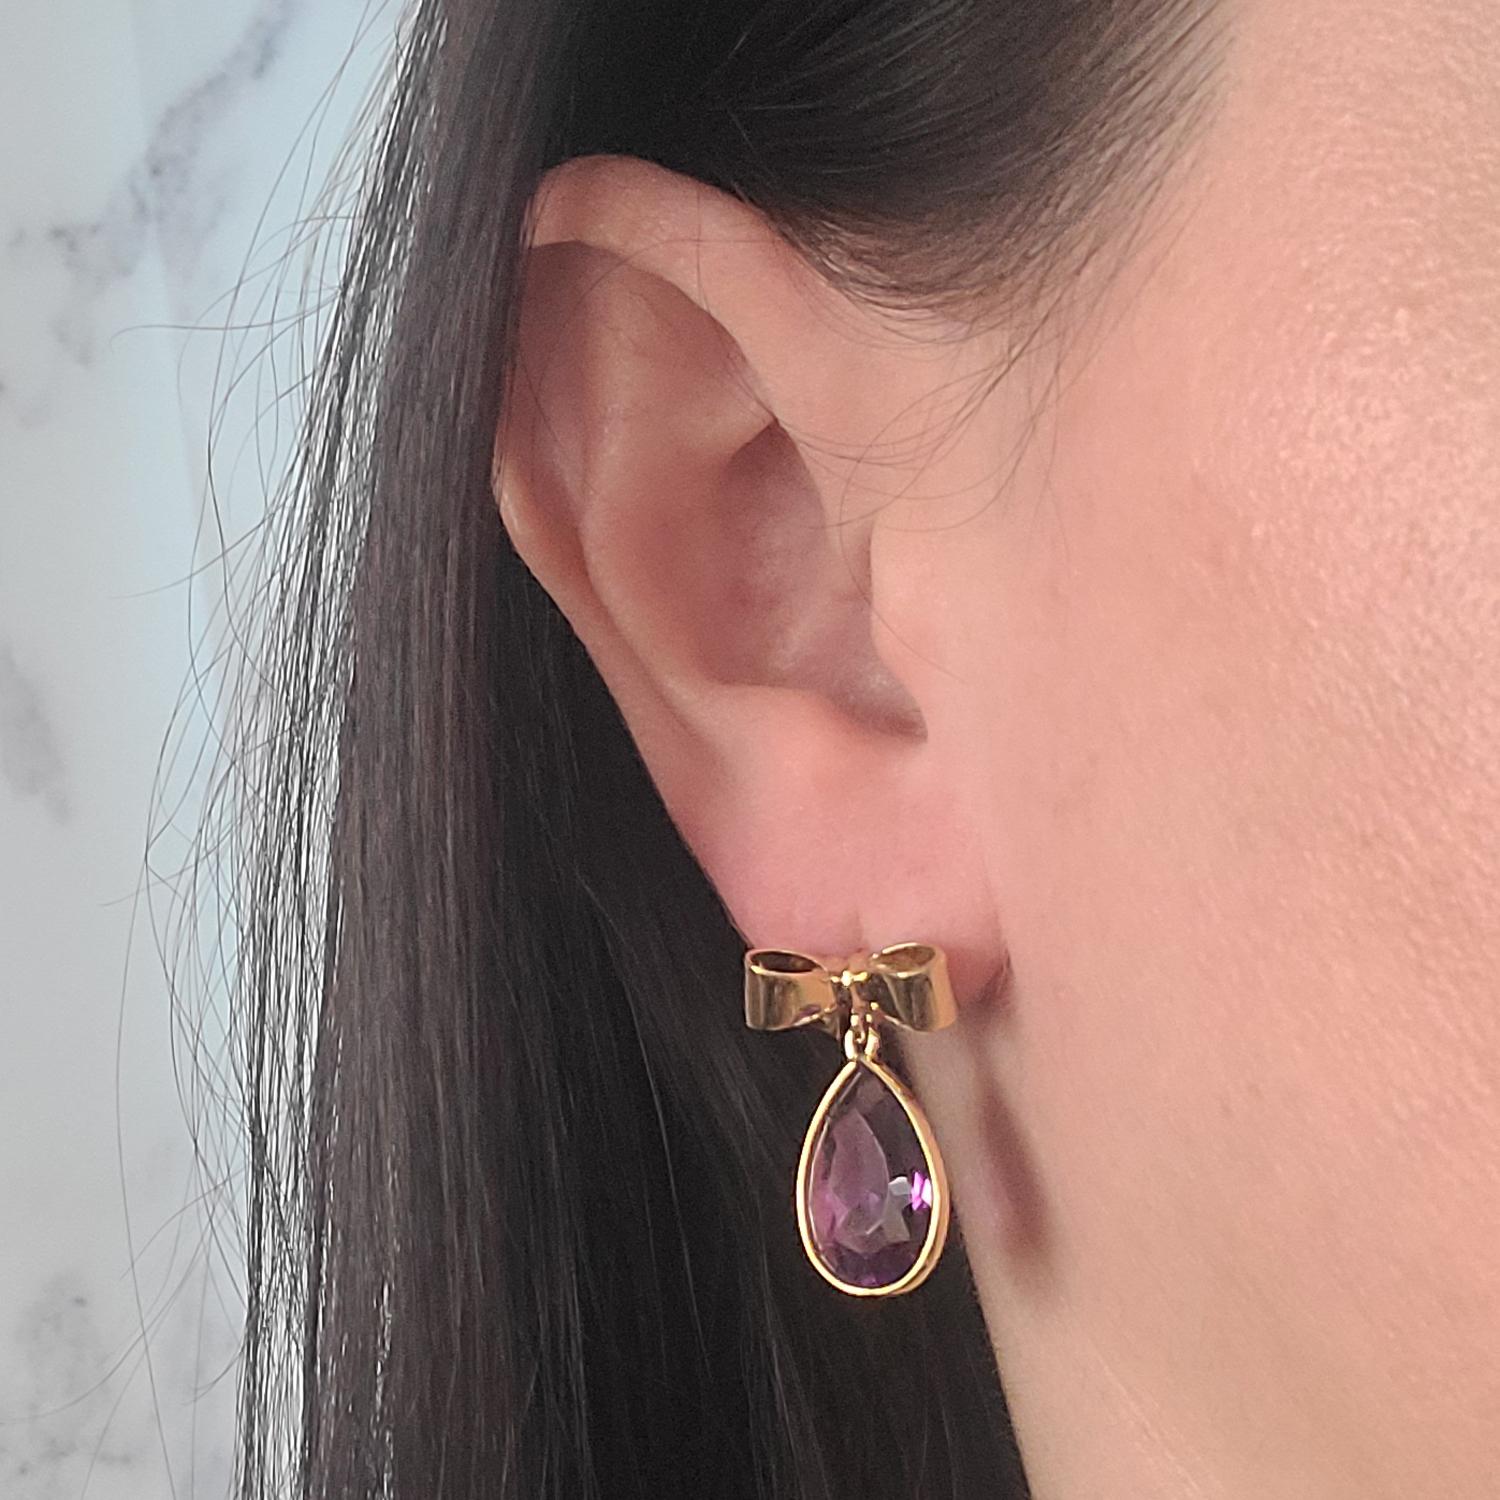 Well-made 18 Karat Yellow Gold Solid Bow Drop Earrings Featuring 2 Bezel Set Pear Cut Amethysts Totaling Approximately 10 Carats. 1 Inch Length. Pierced Post with Friction Back. Finished Weight Is 9.2 Grams.